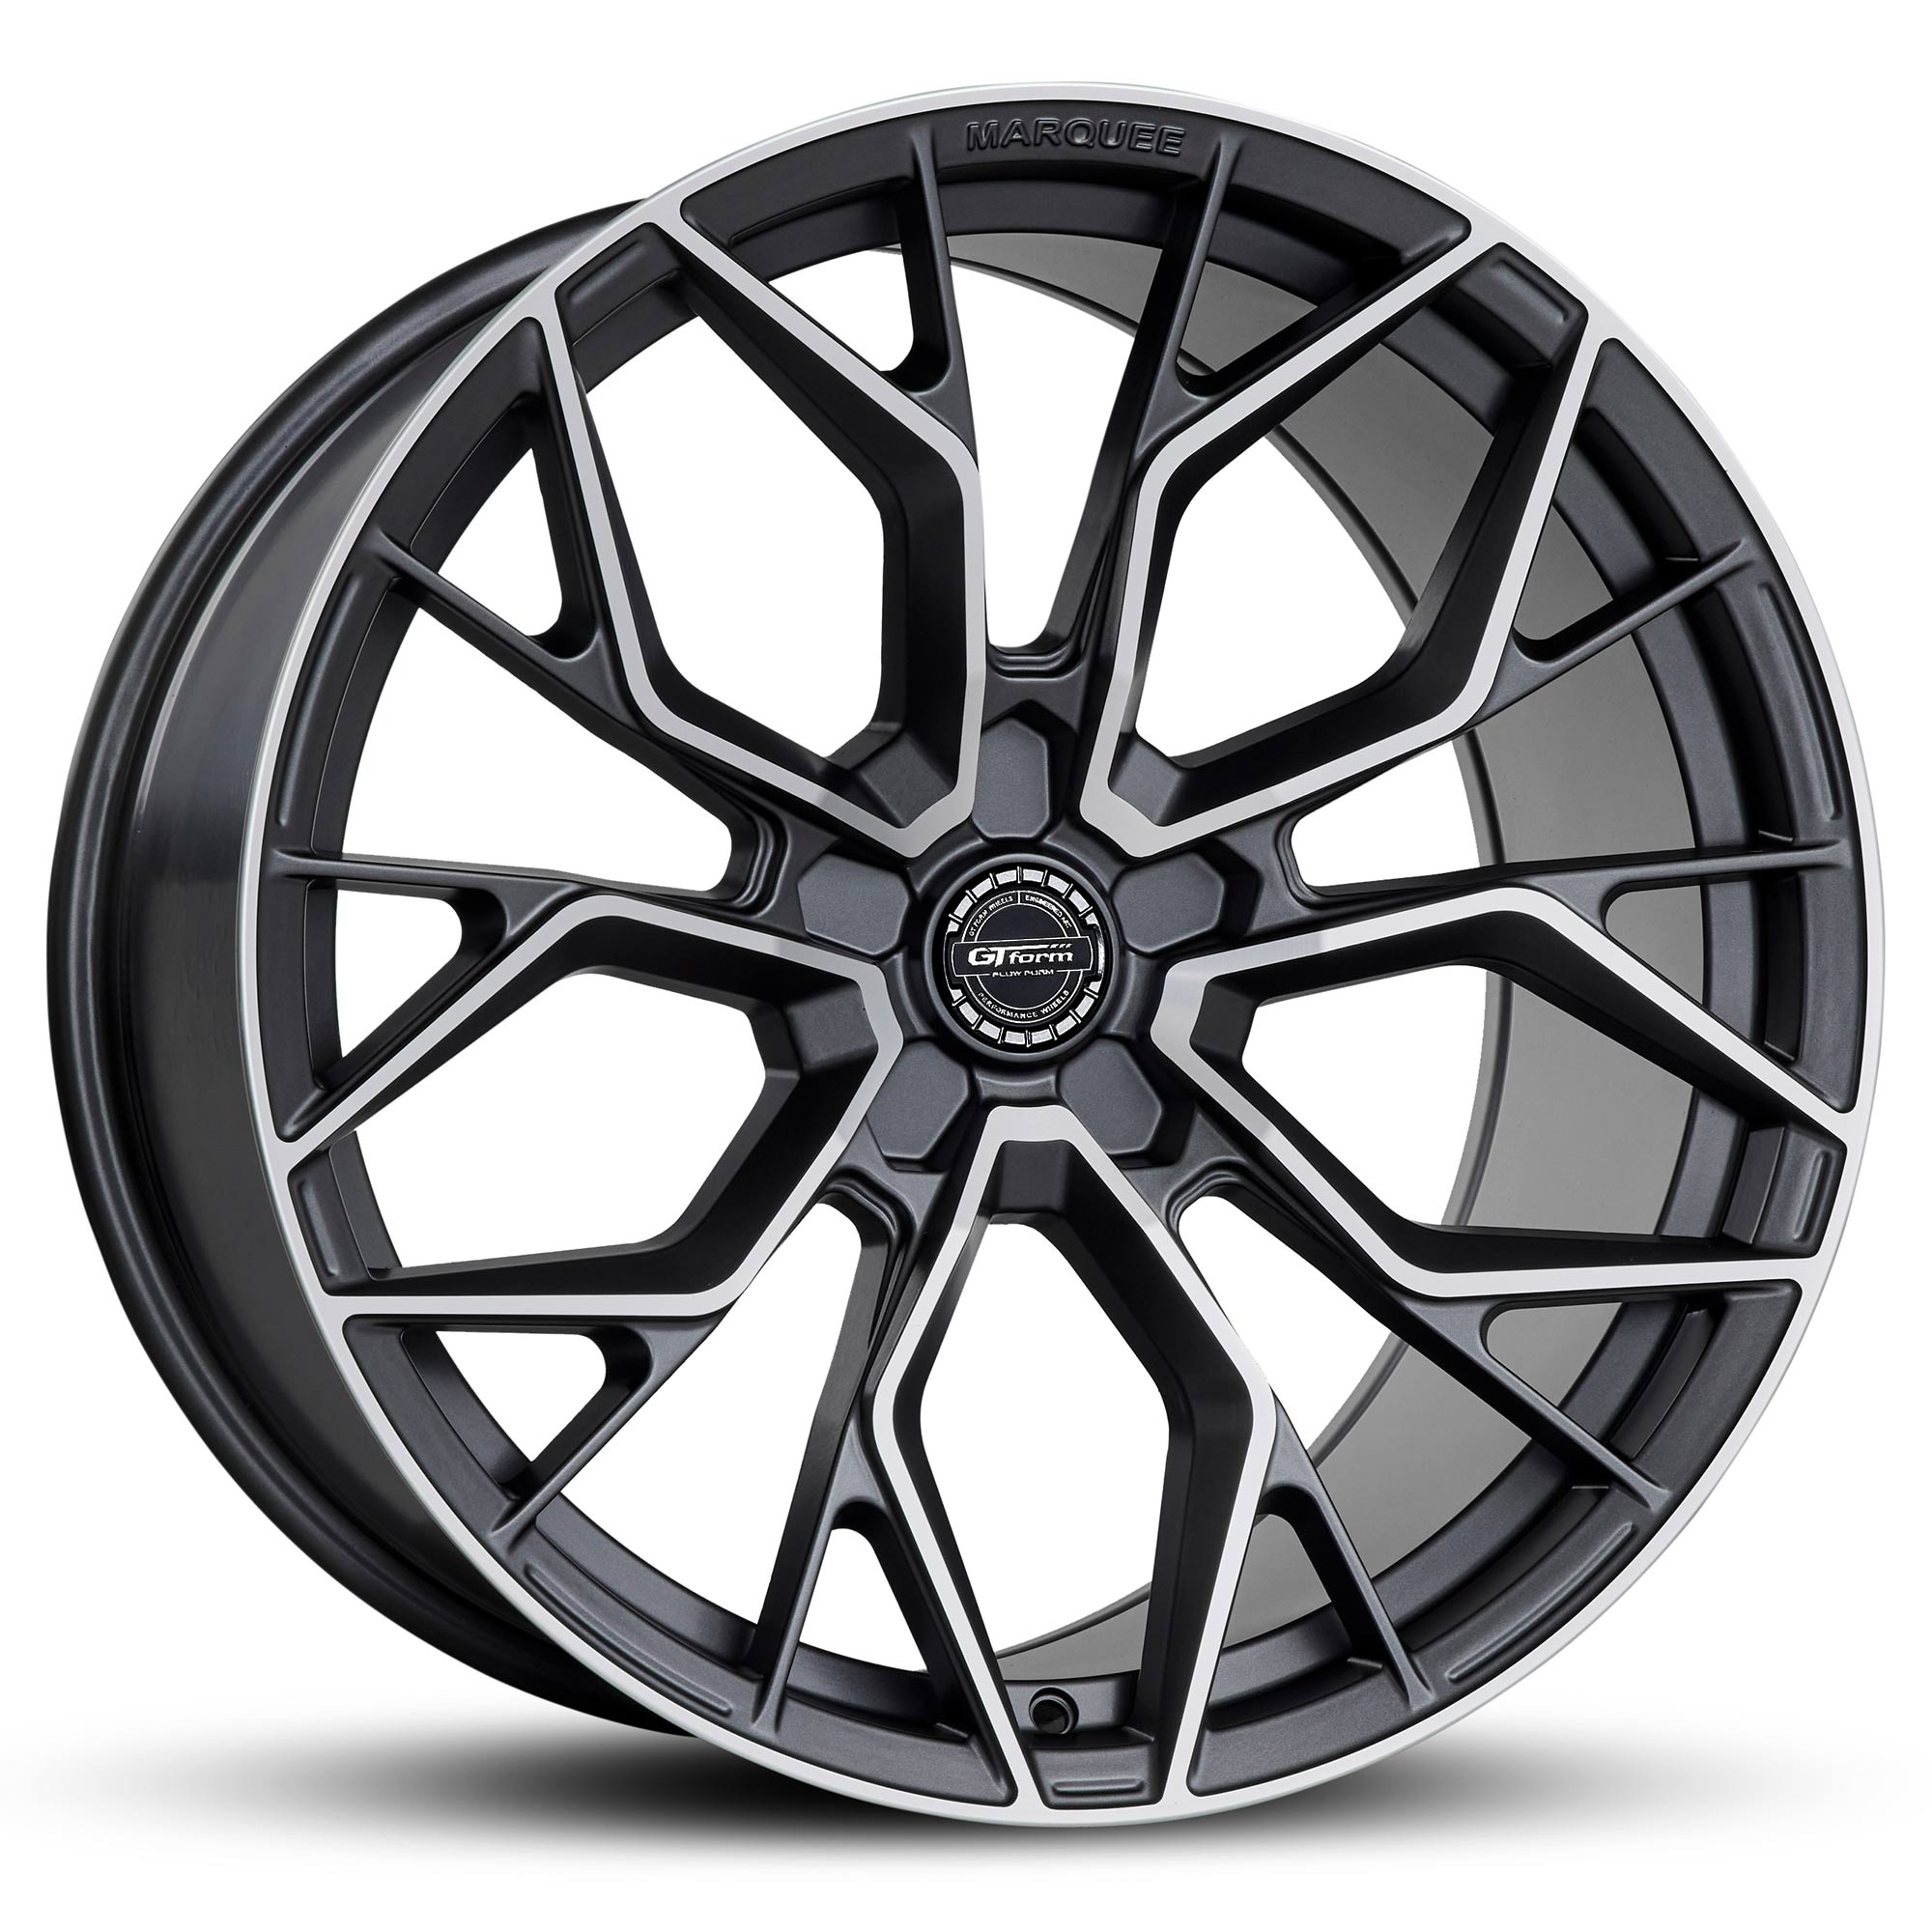 GT FORM MARQUEE GUNMETAL MACHINED FACE 18X8